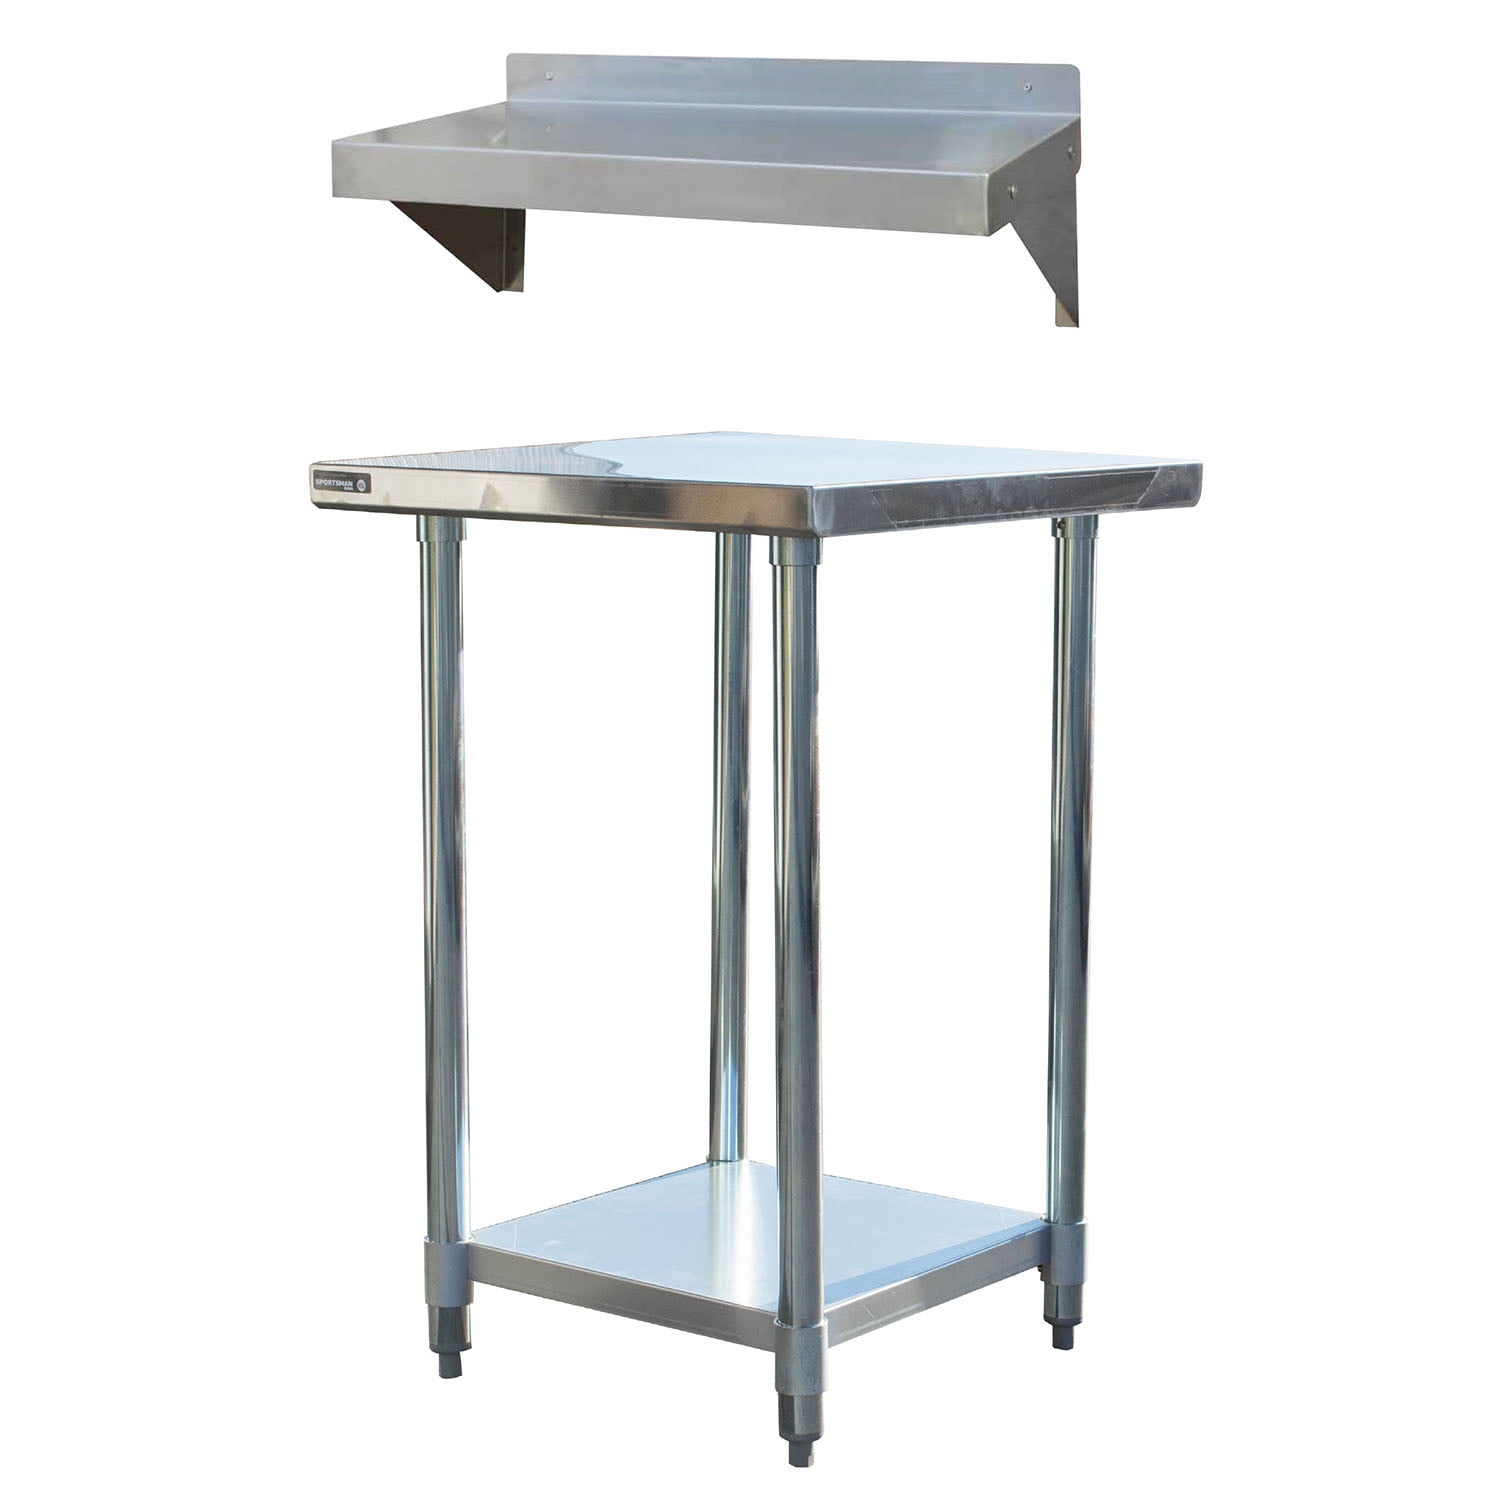 Picture of Sportsman Series SSWSET24 24 in. Stainless Steel Work Station with Workbench Table & Utility Shelf - 24 in. - Silver